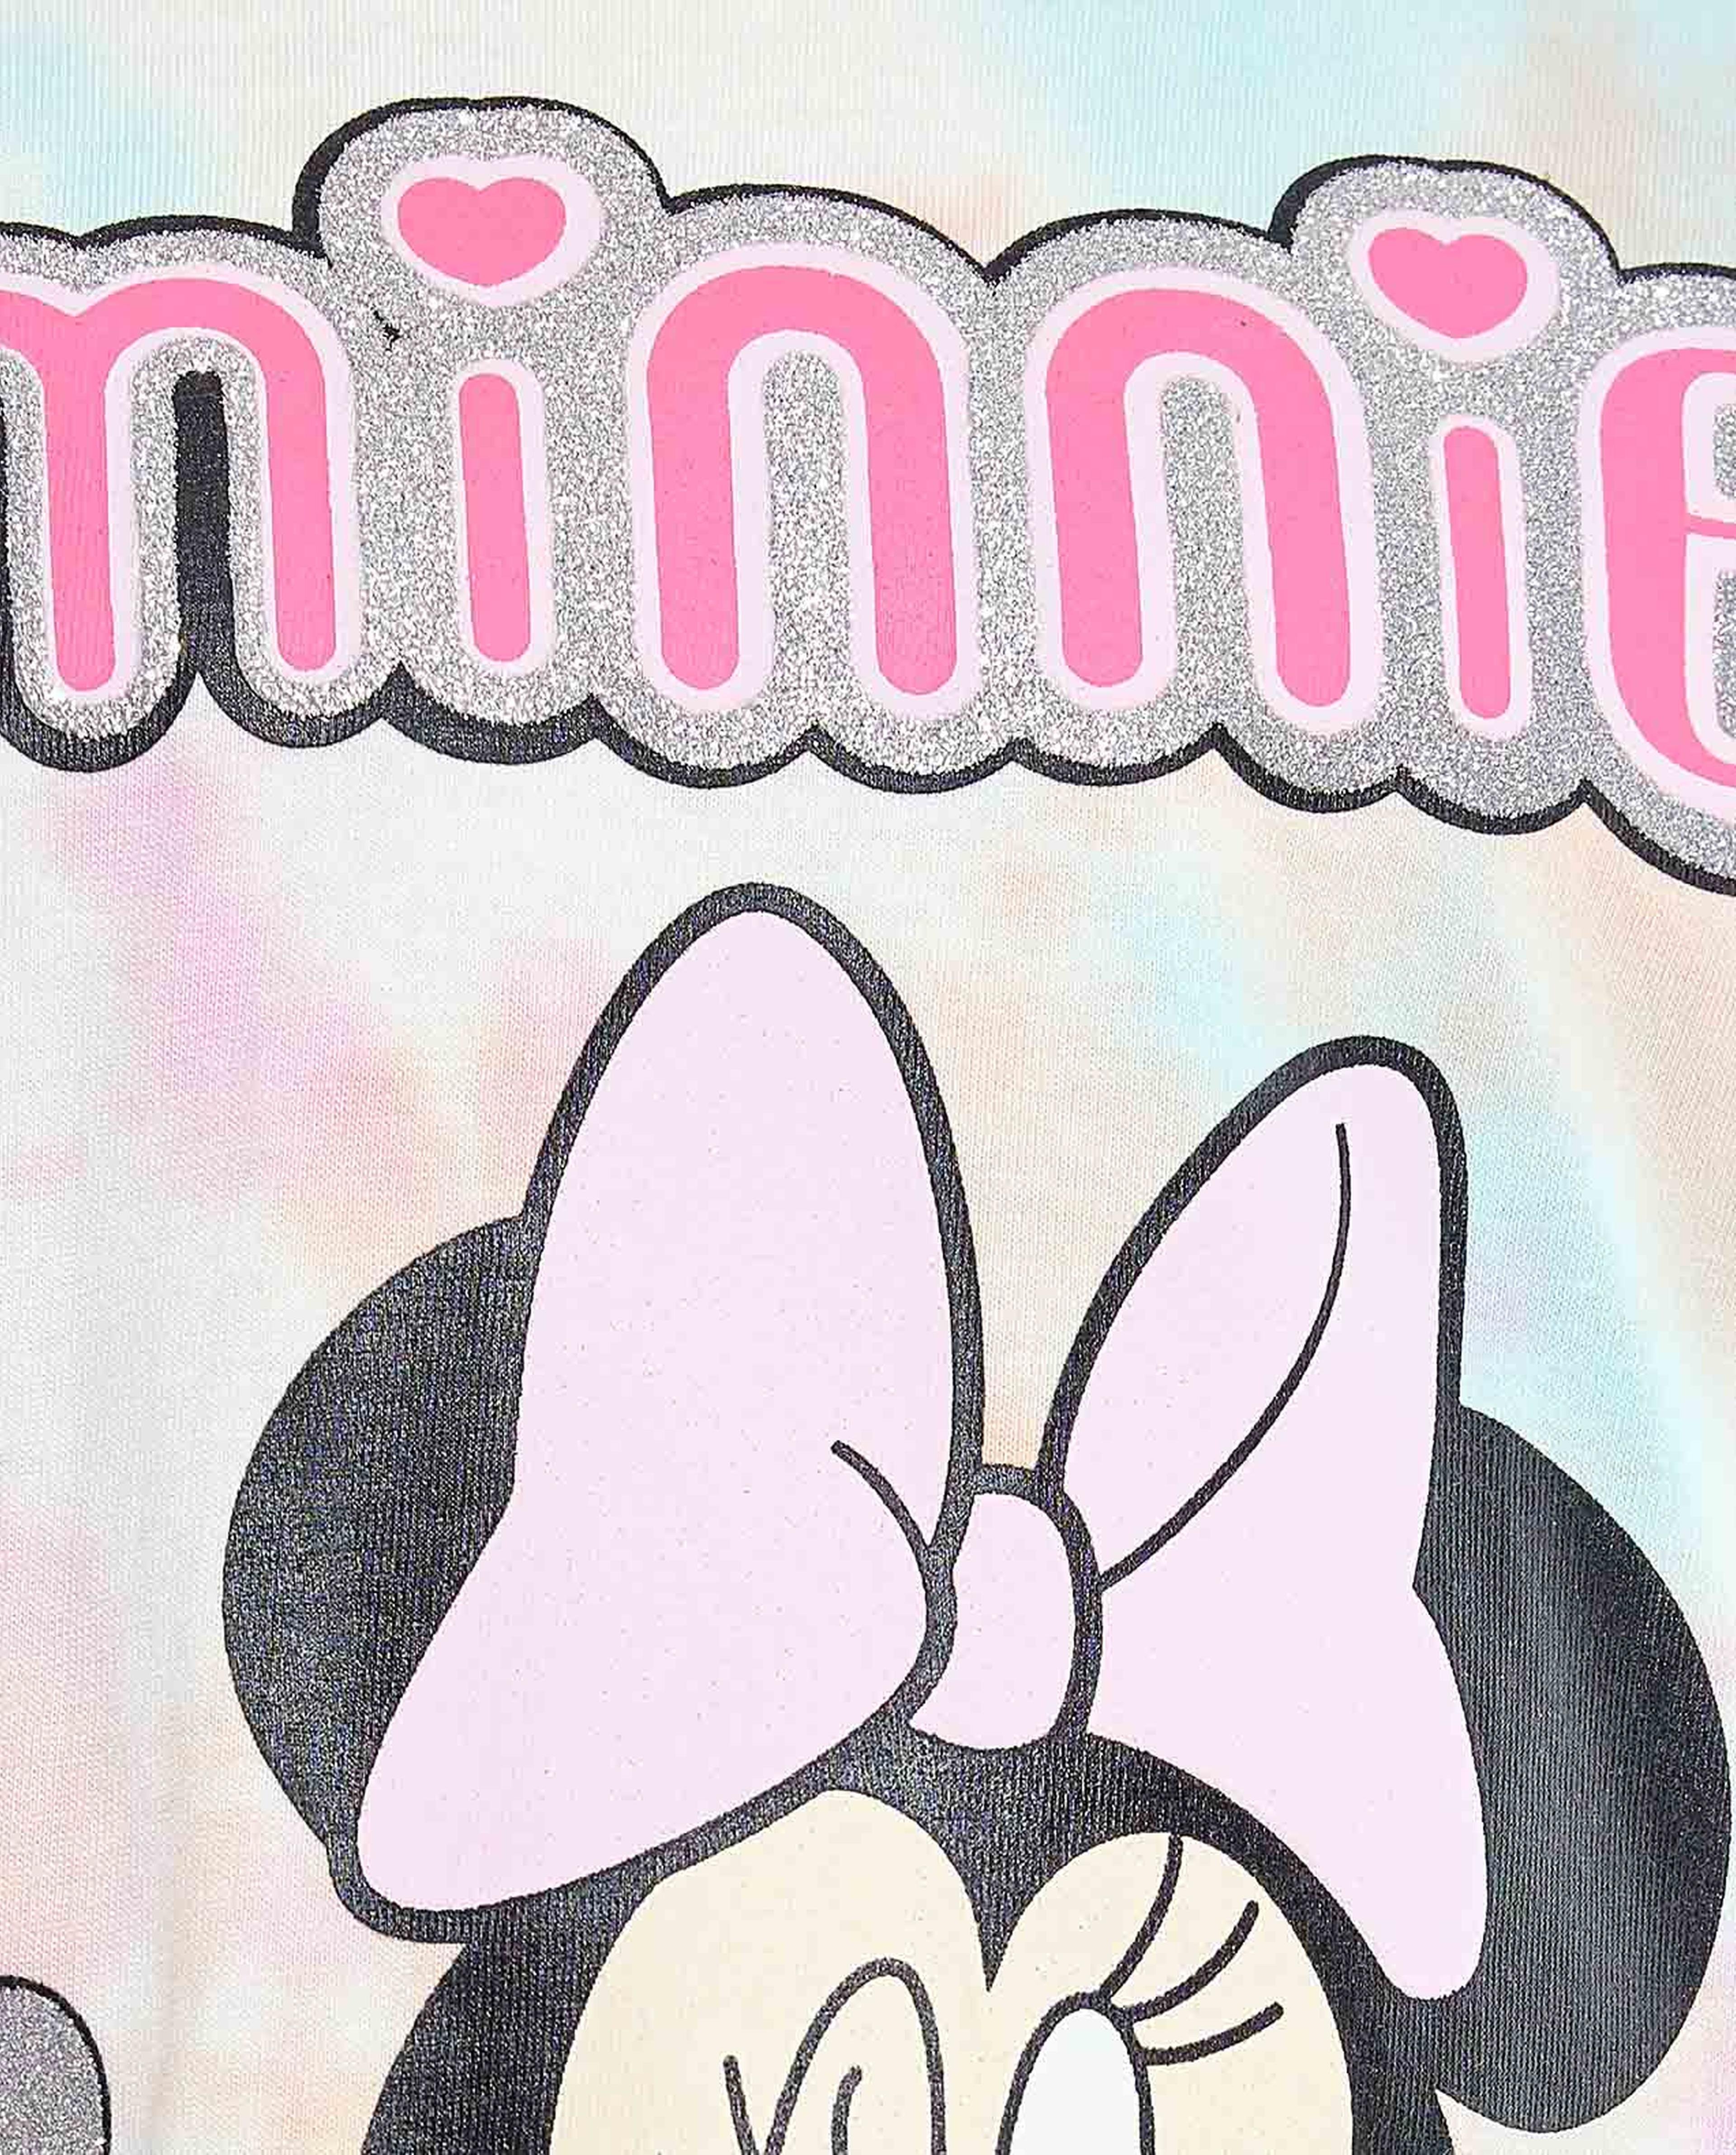 Minnie Mouse Print T-Shirt with Crew Neck and Short Sleeves